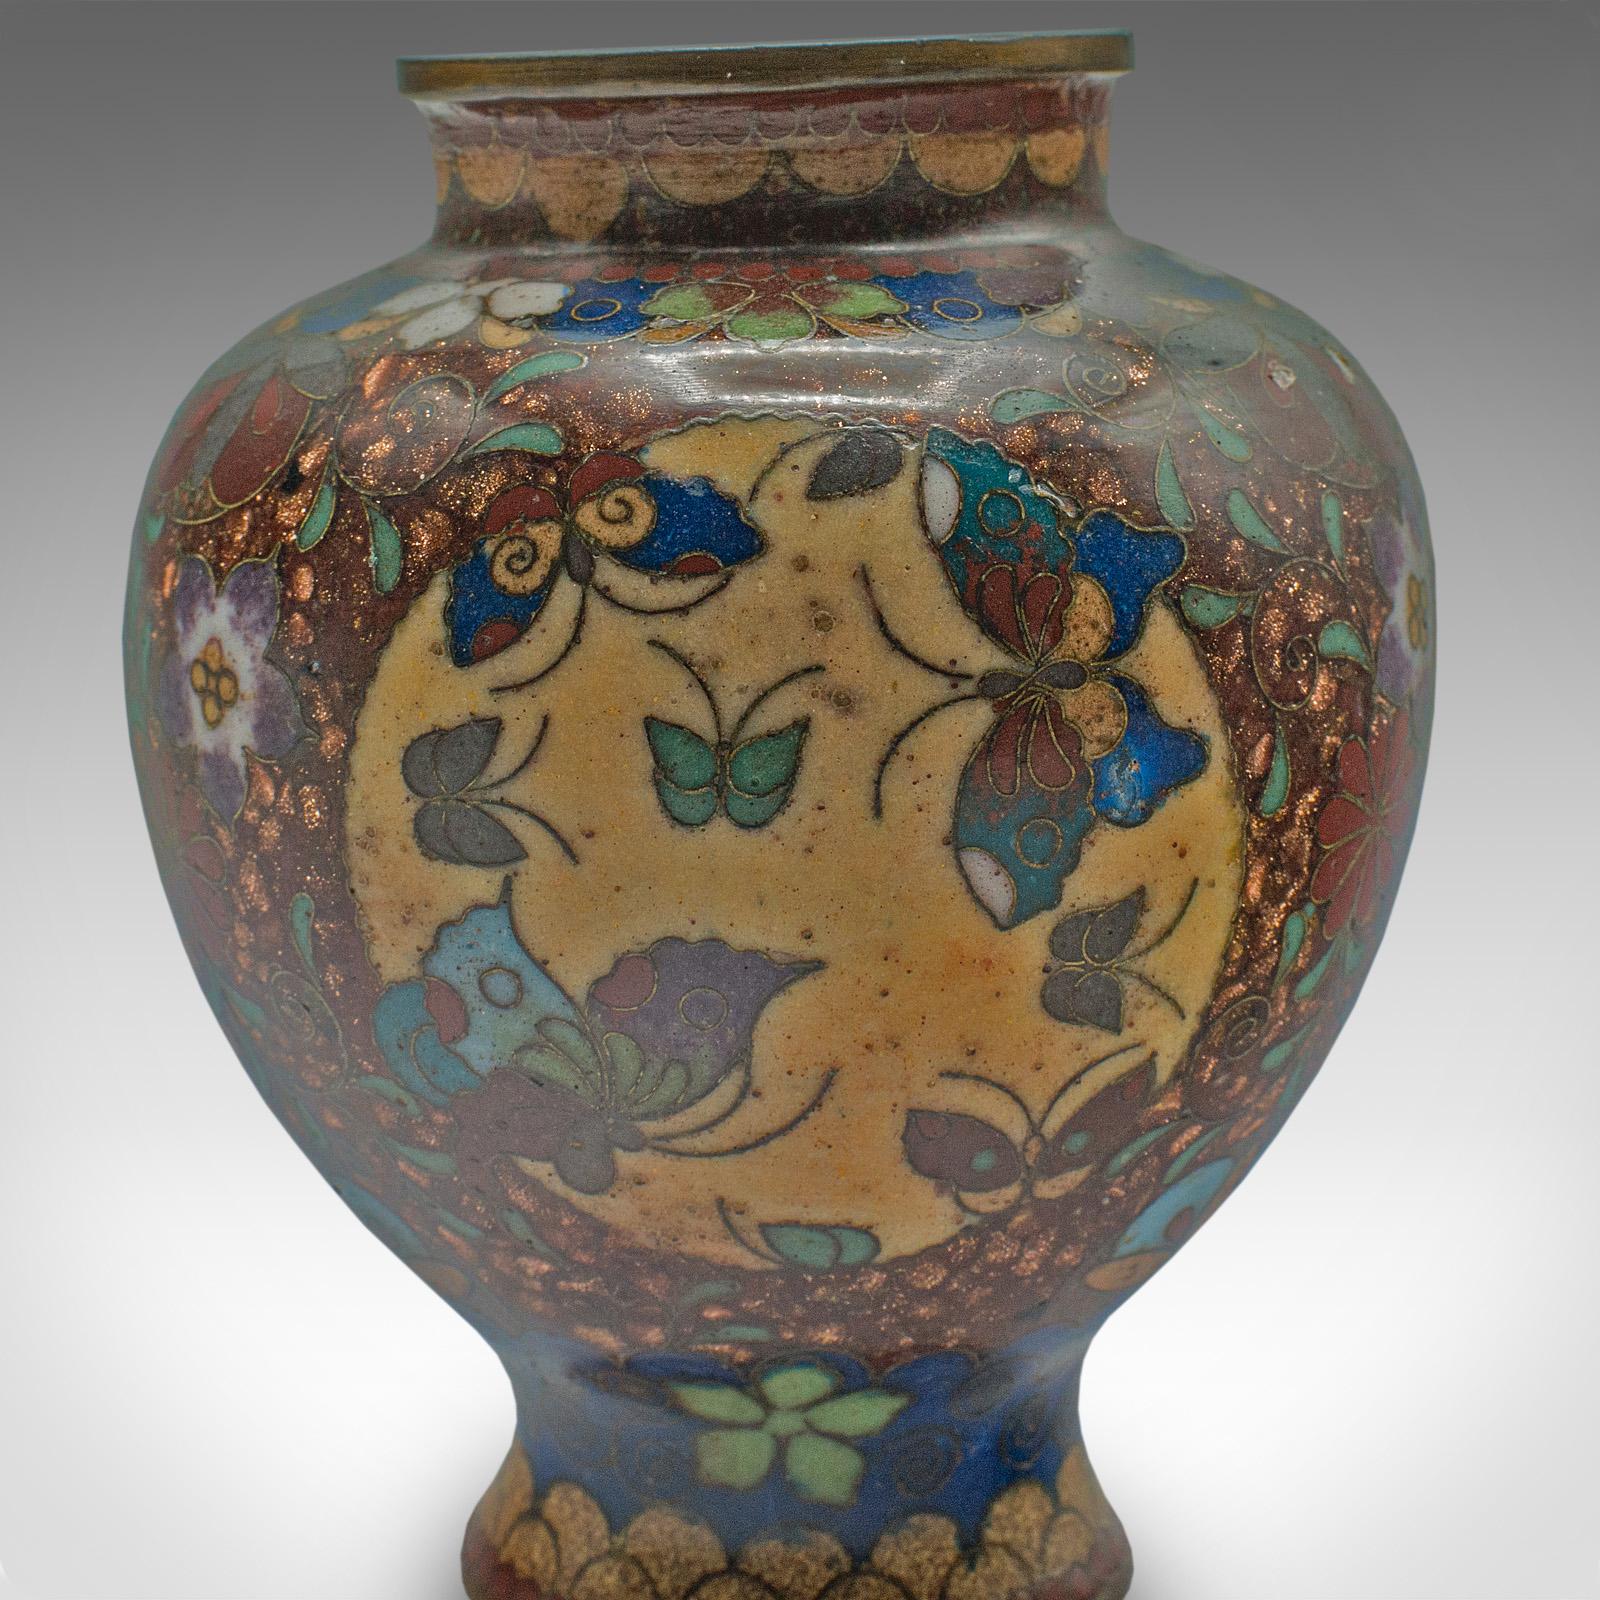 Small Vintage Posy Vase, Chinese, Cloisonne, Display Urn, Art Deco, Circa 1940 For Sale 4